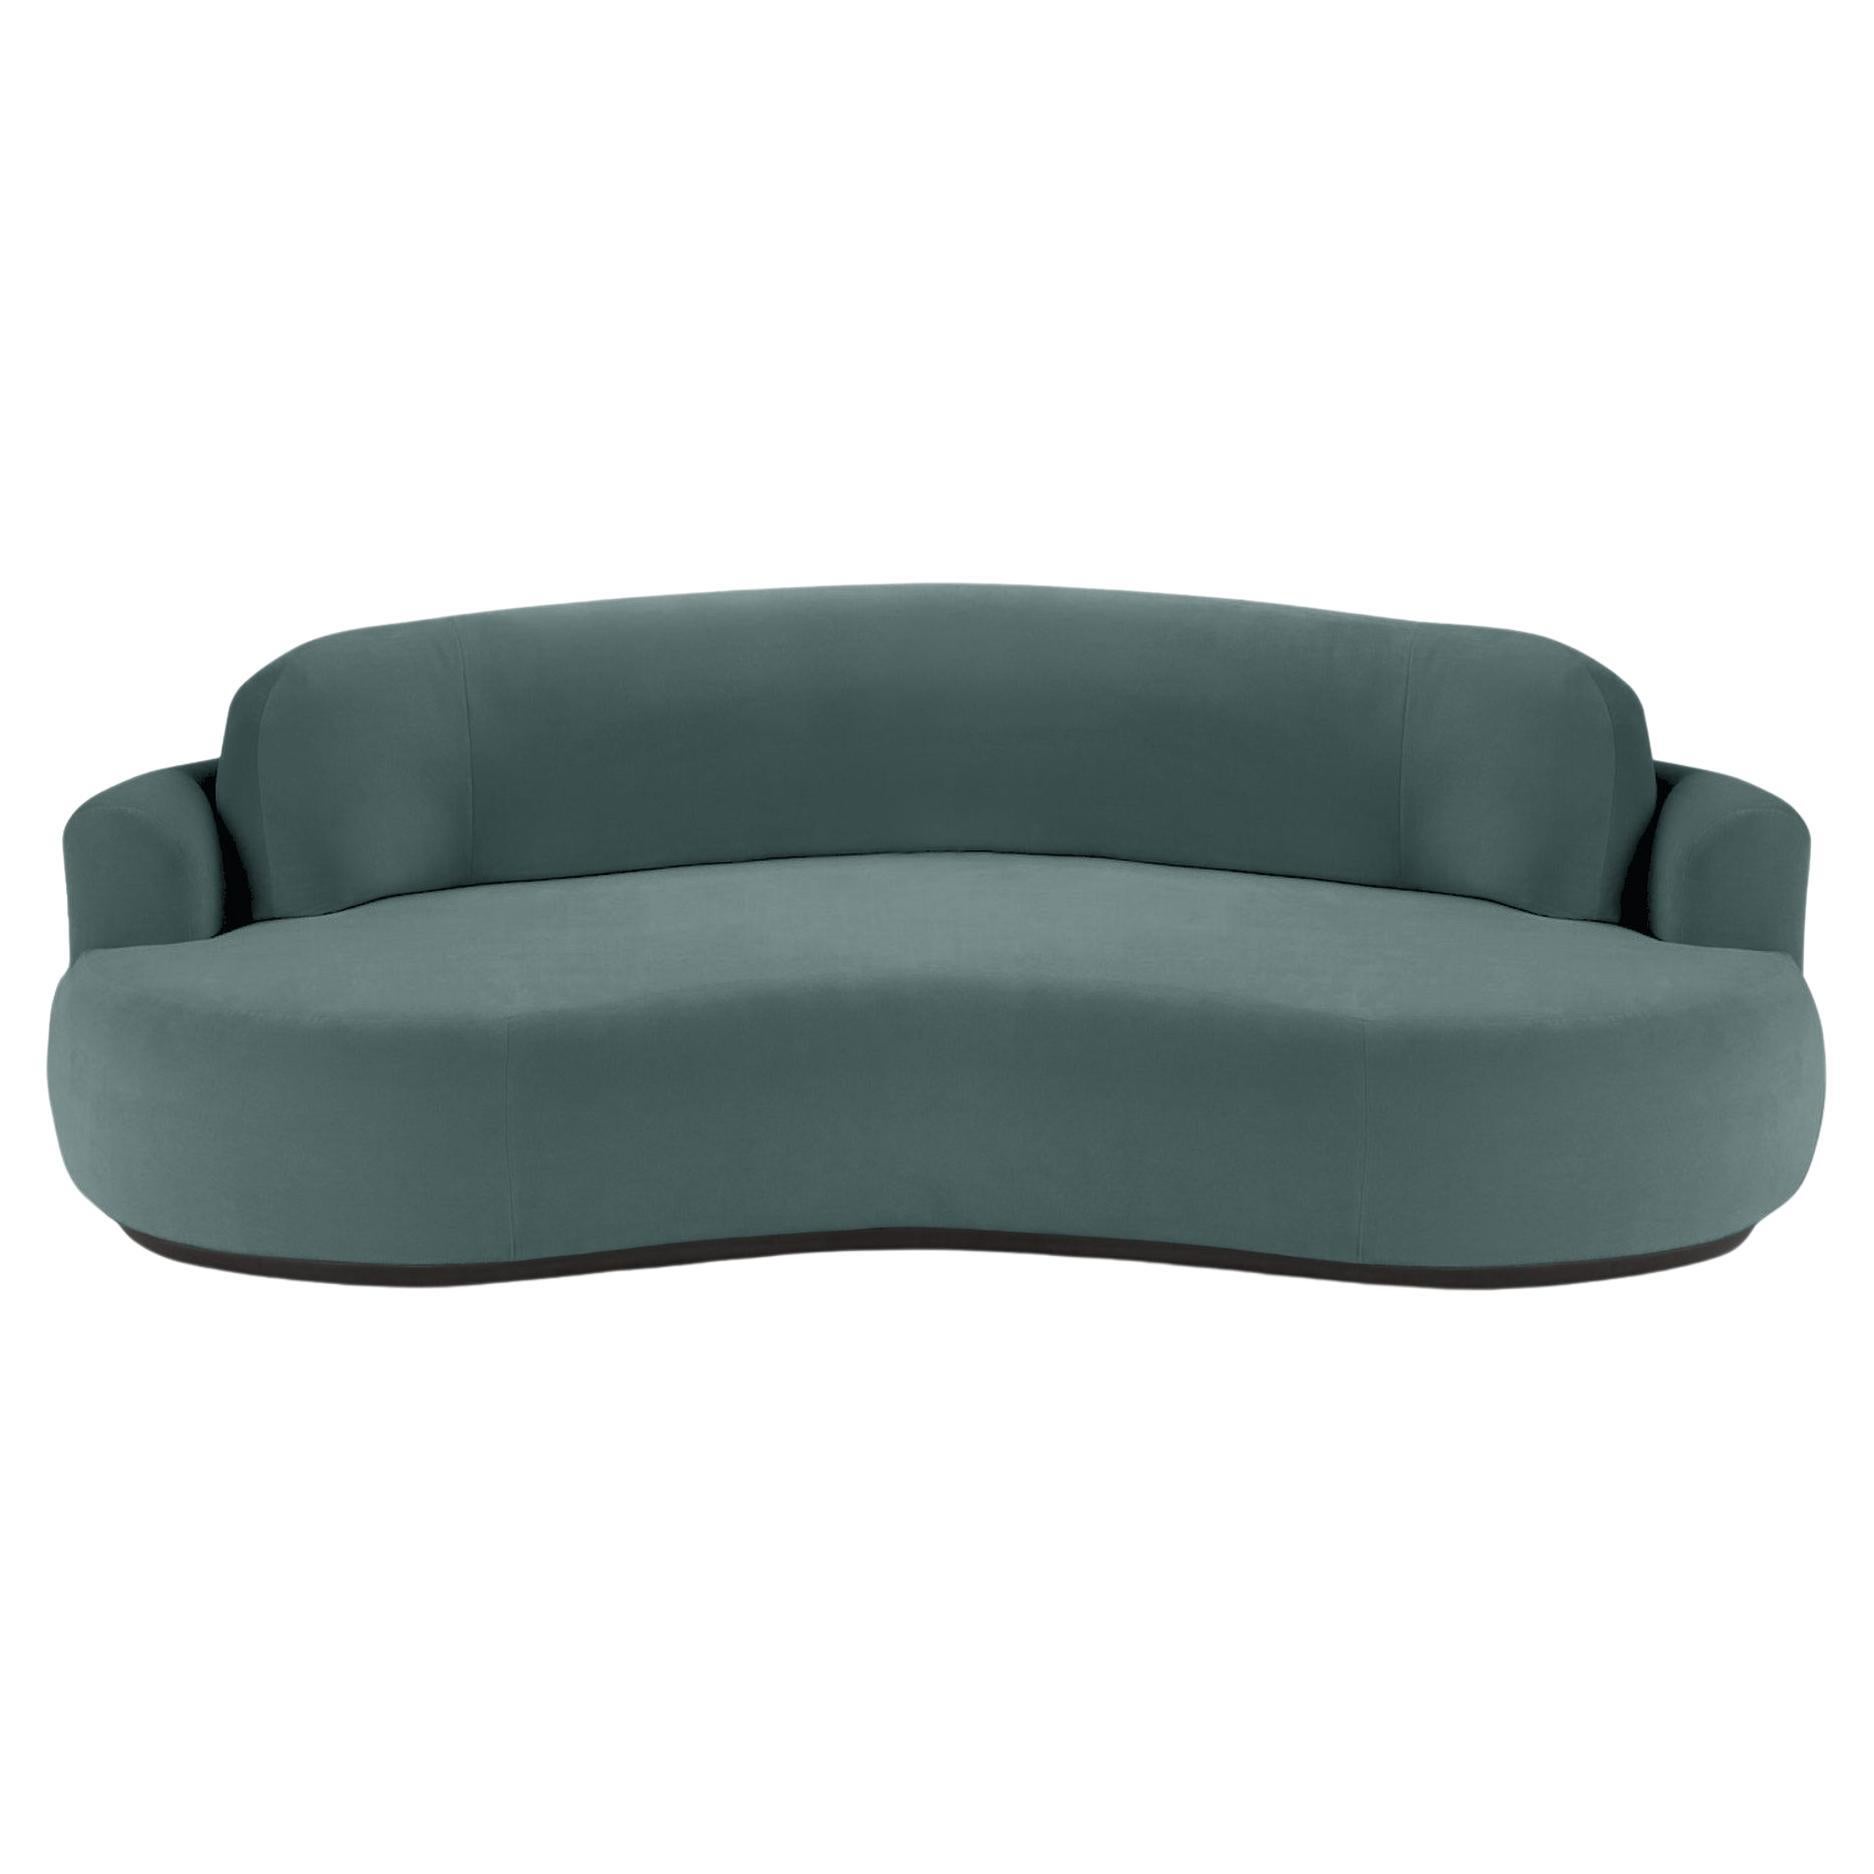 Naked Round Sofa, Small with Beech Ash-056-5 and Teal